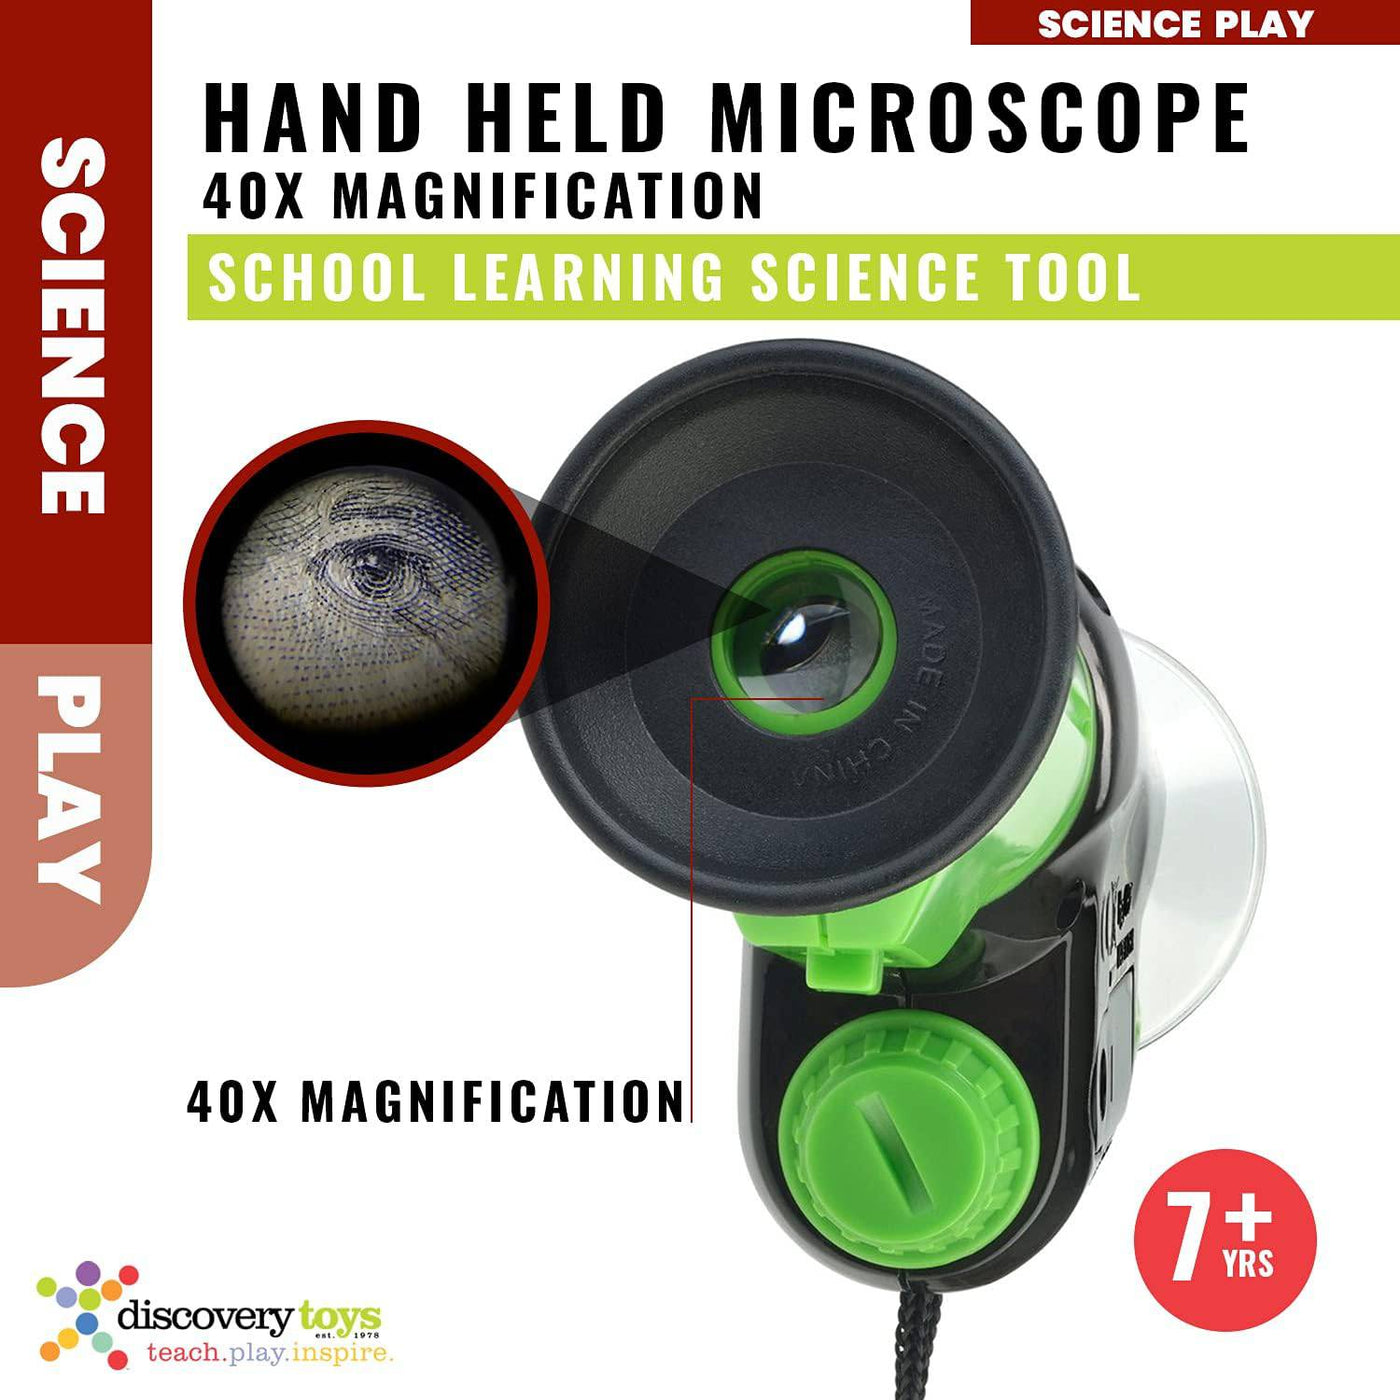 EXPLORE IT! HANDHELD MICROSCOPE - Pocket Portable Microscope for kids - Discovery Toys